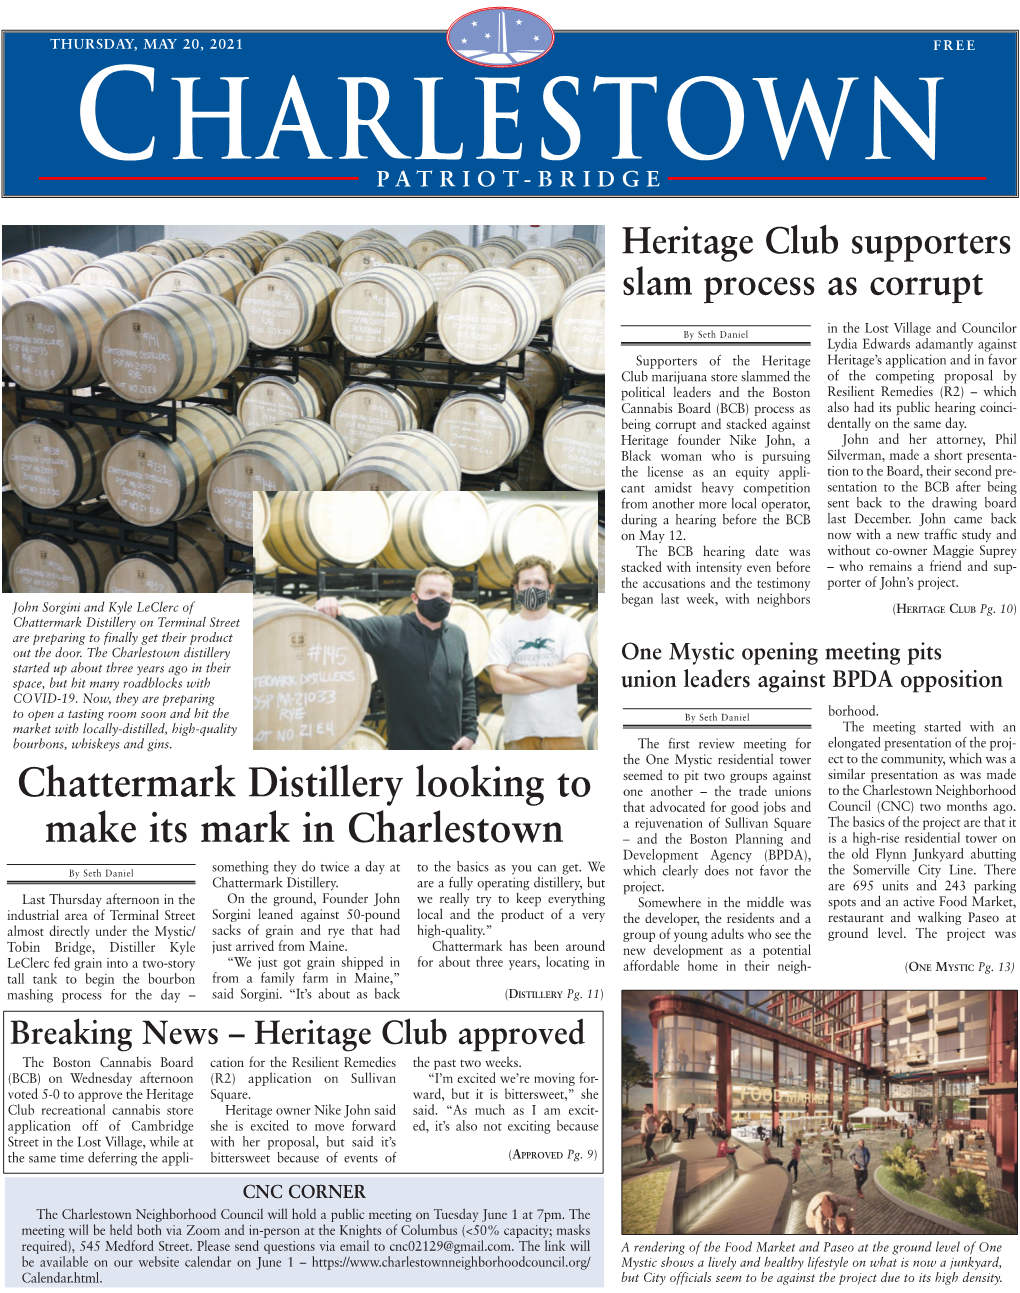 Chattermark Distillery Looking to Make Its Mark in Charlestown